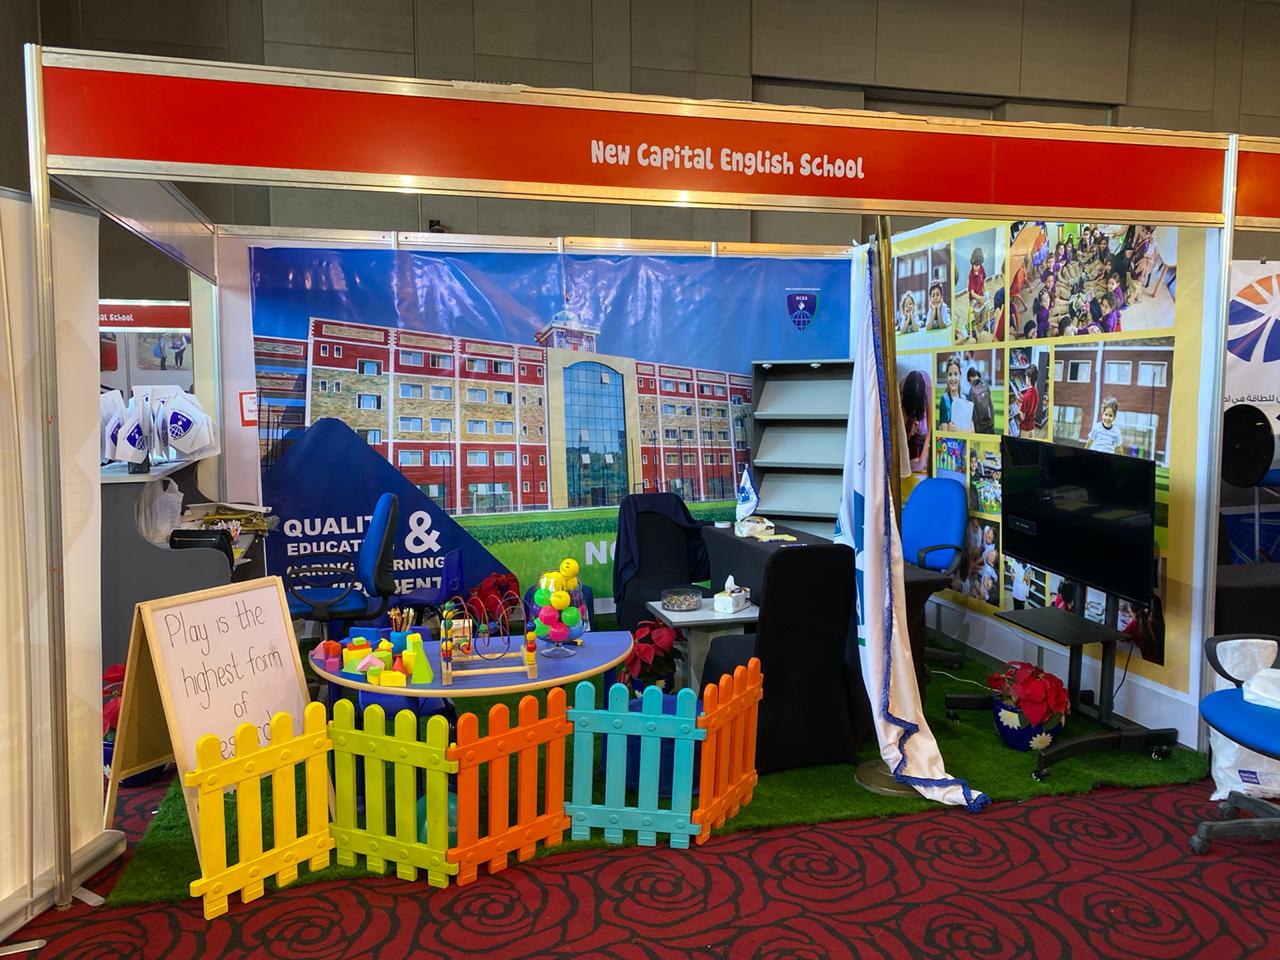 child expo about us template